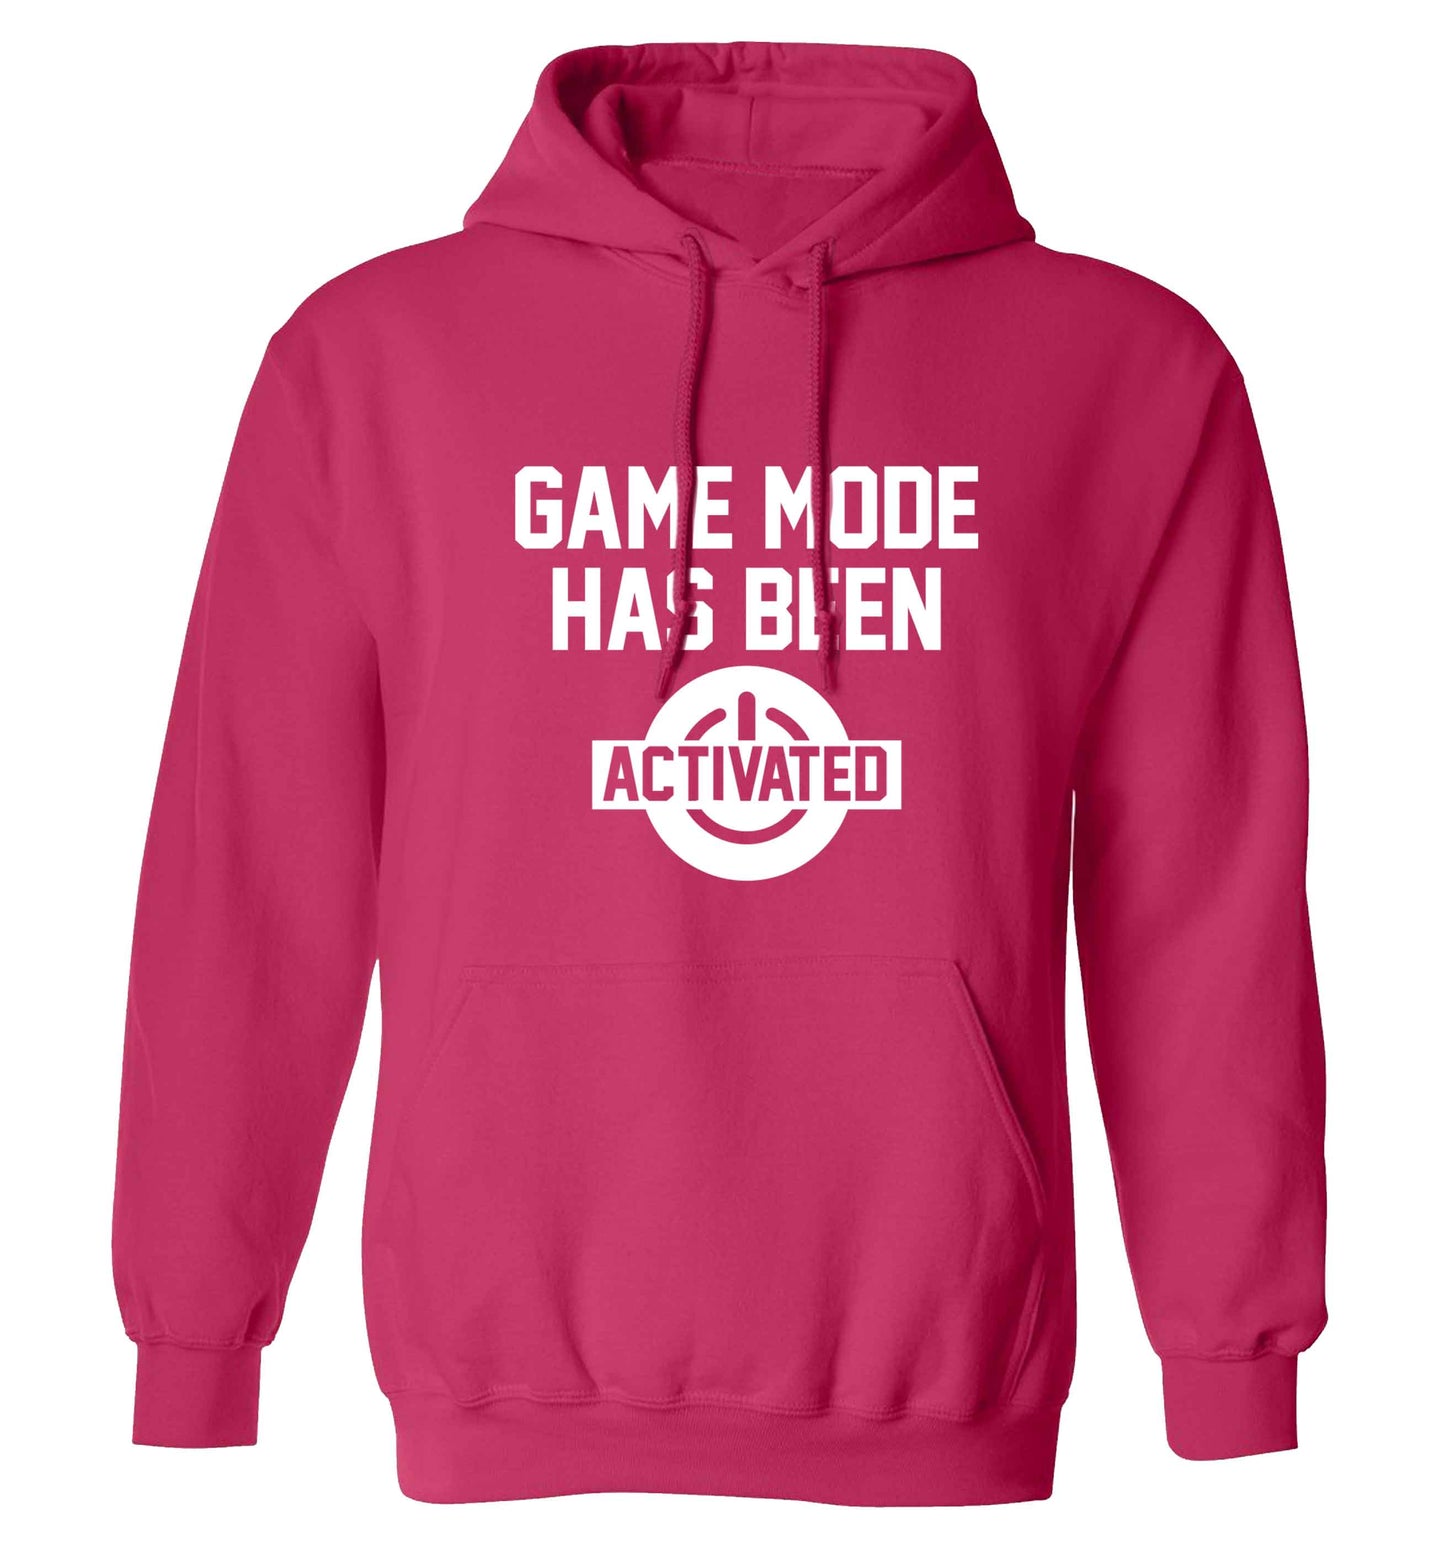 Game mode has been activated adults unisex pink hoodie 2XL